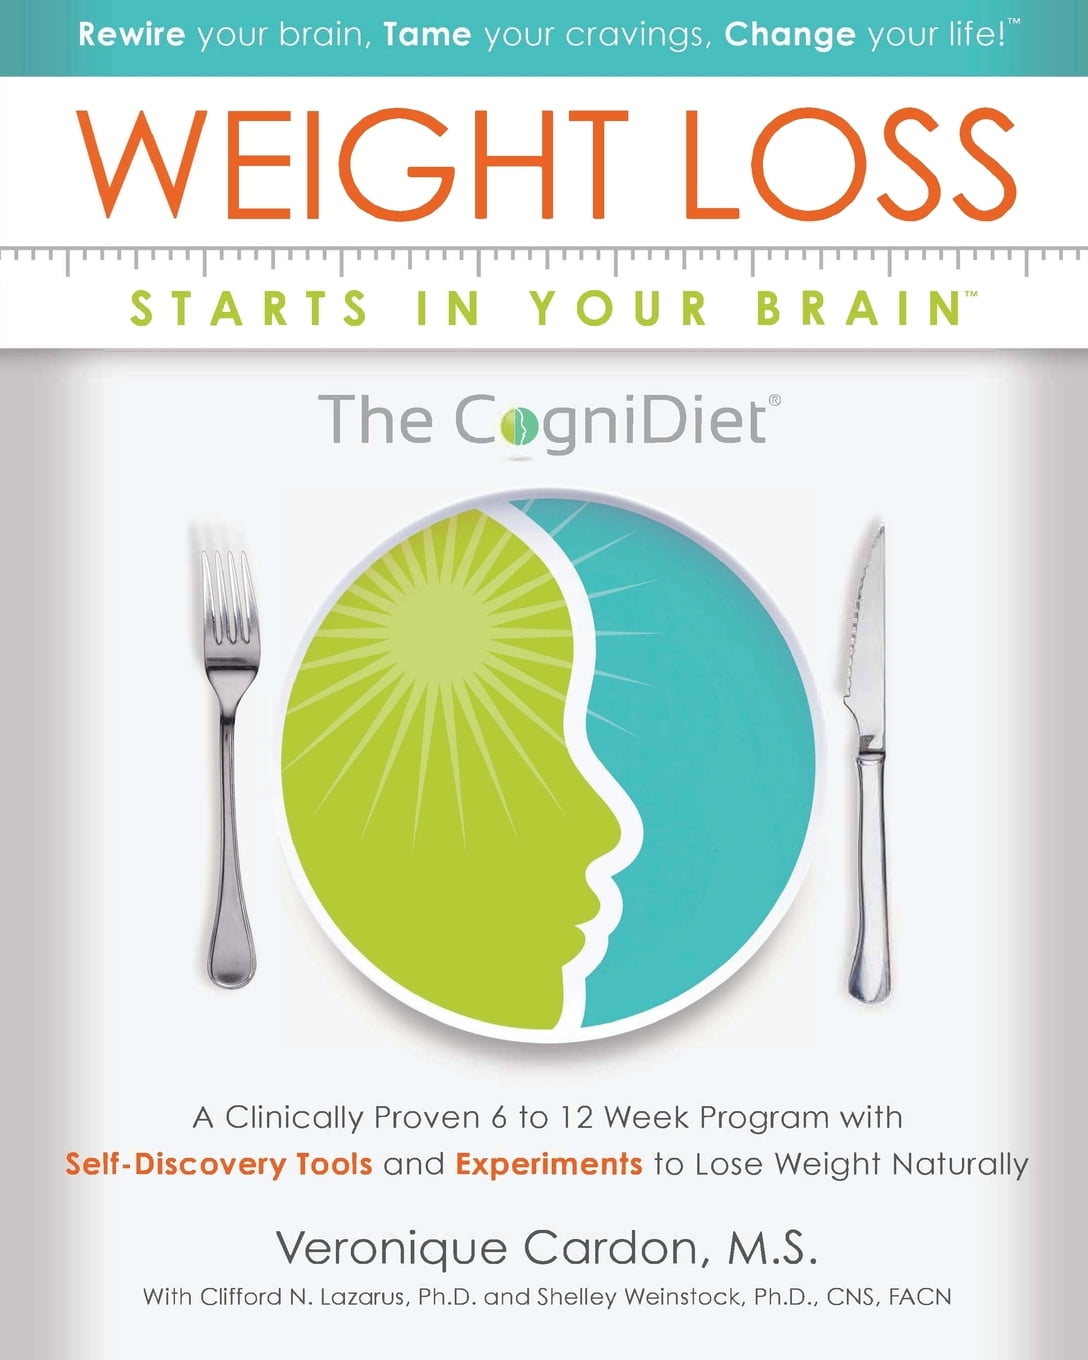 Weight Loss Starts In Your Brain : A Clinically Proven 6 to 12 Week Program  with Self-Discovery Tools and Experiments to Lose Weight Naturally.